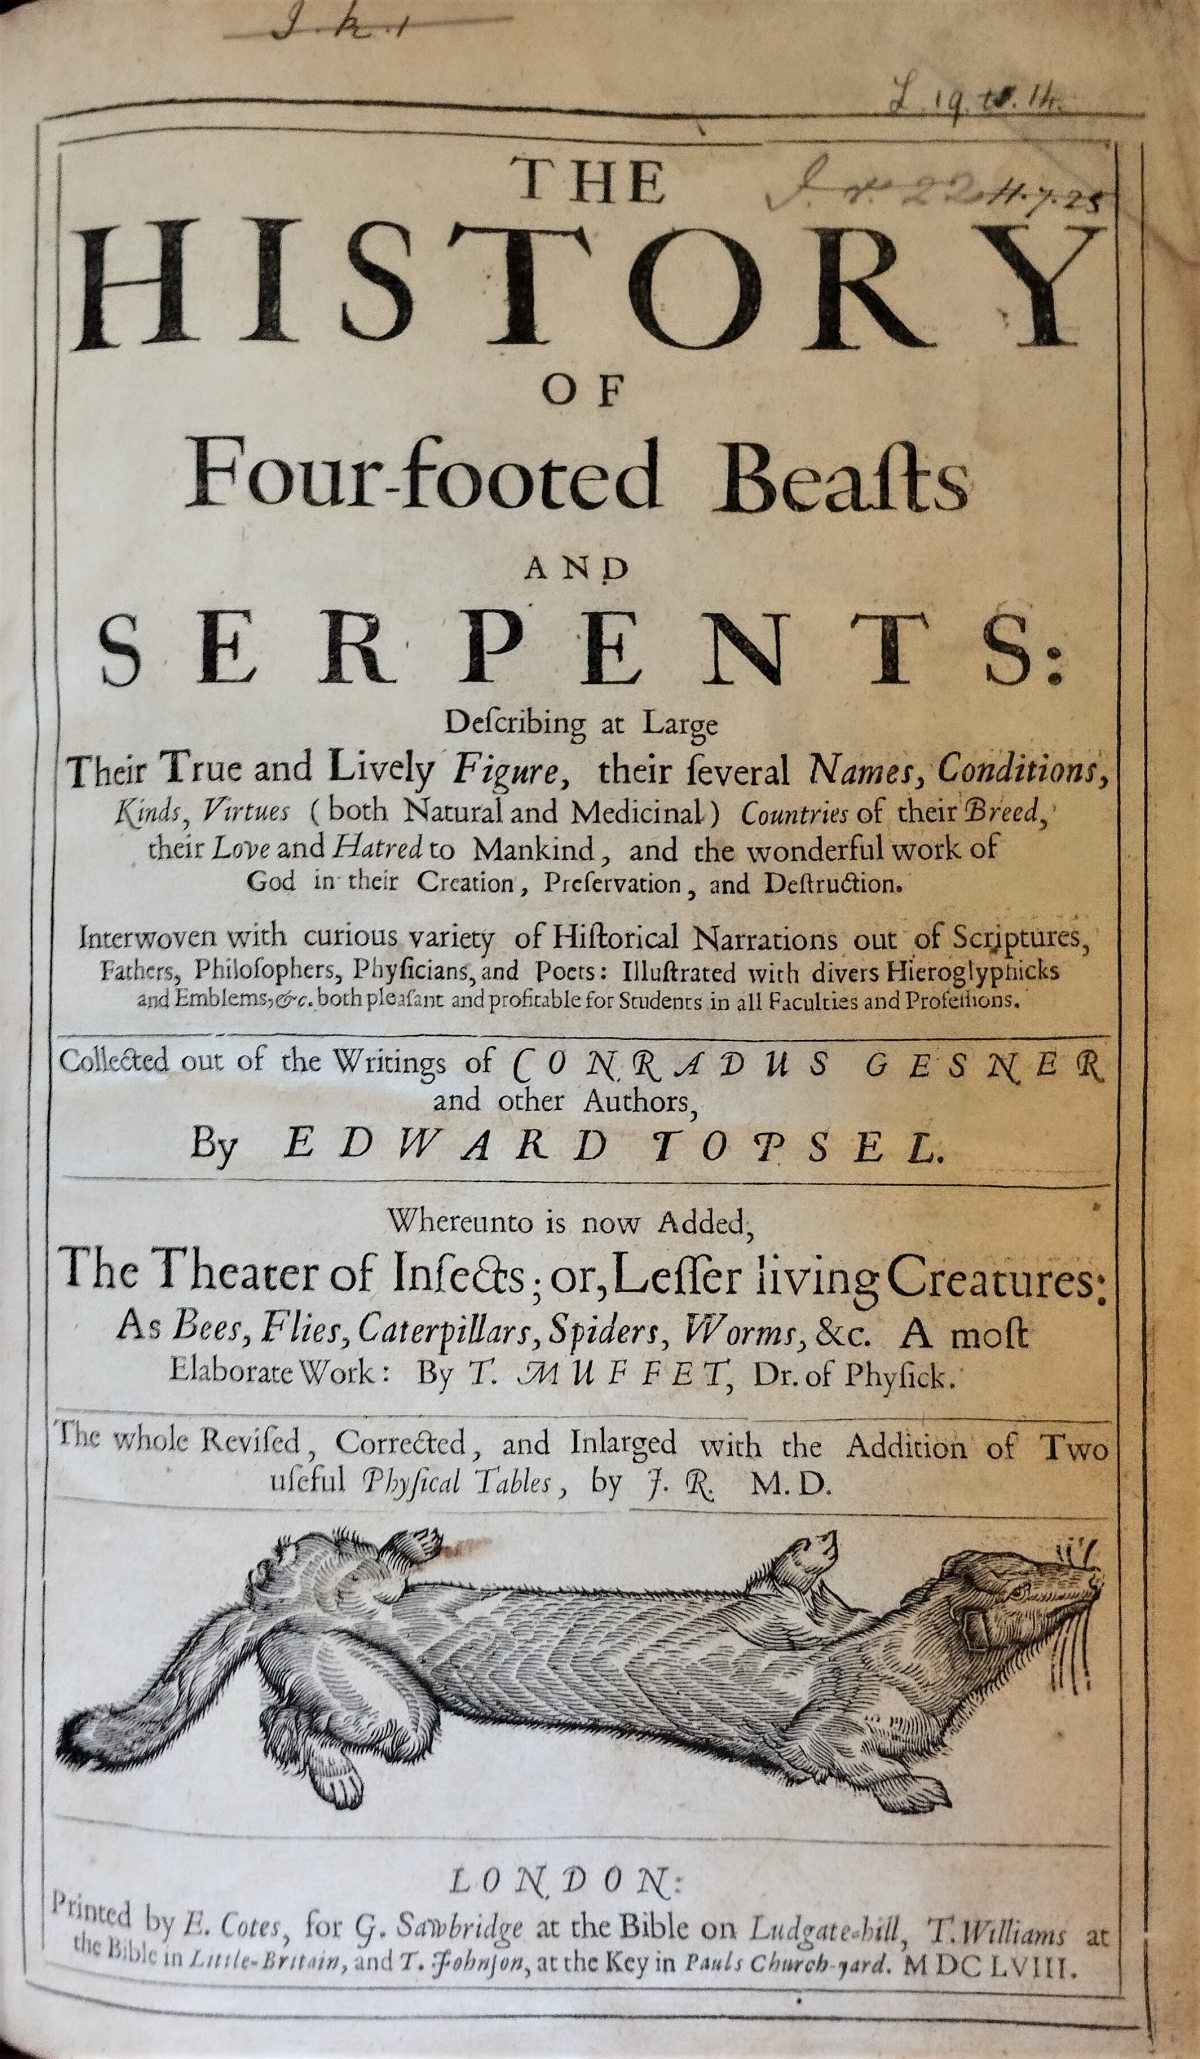 Title page of the book "The History of Four-footed Beasts and Serpents" by Edward Topsell (1658). Text within double ruled border, woodcut of a weasel crawling at the bottom.